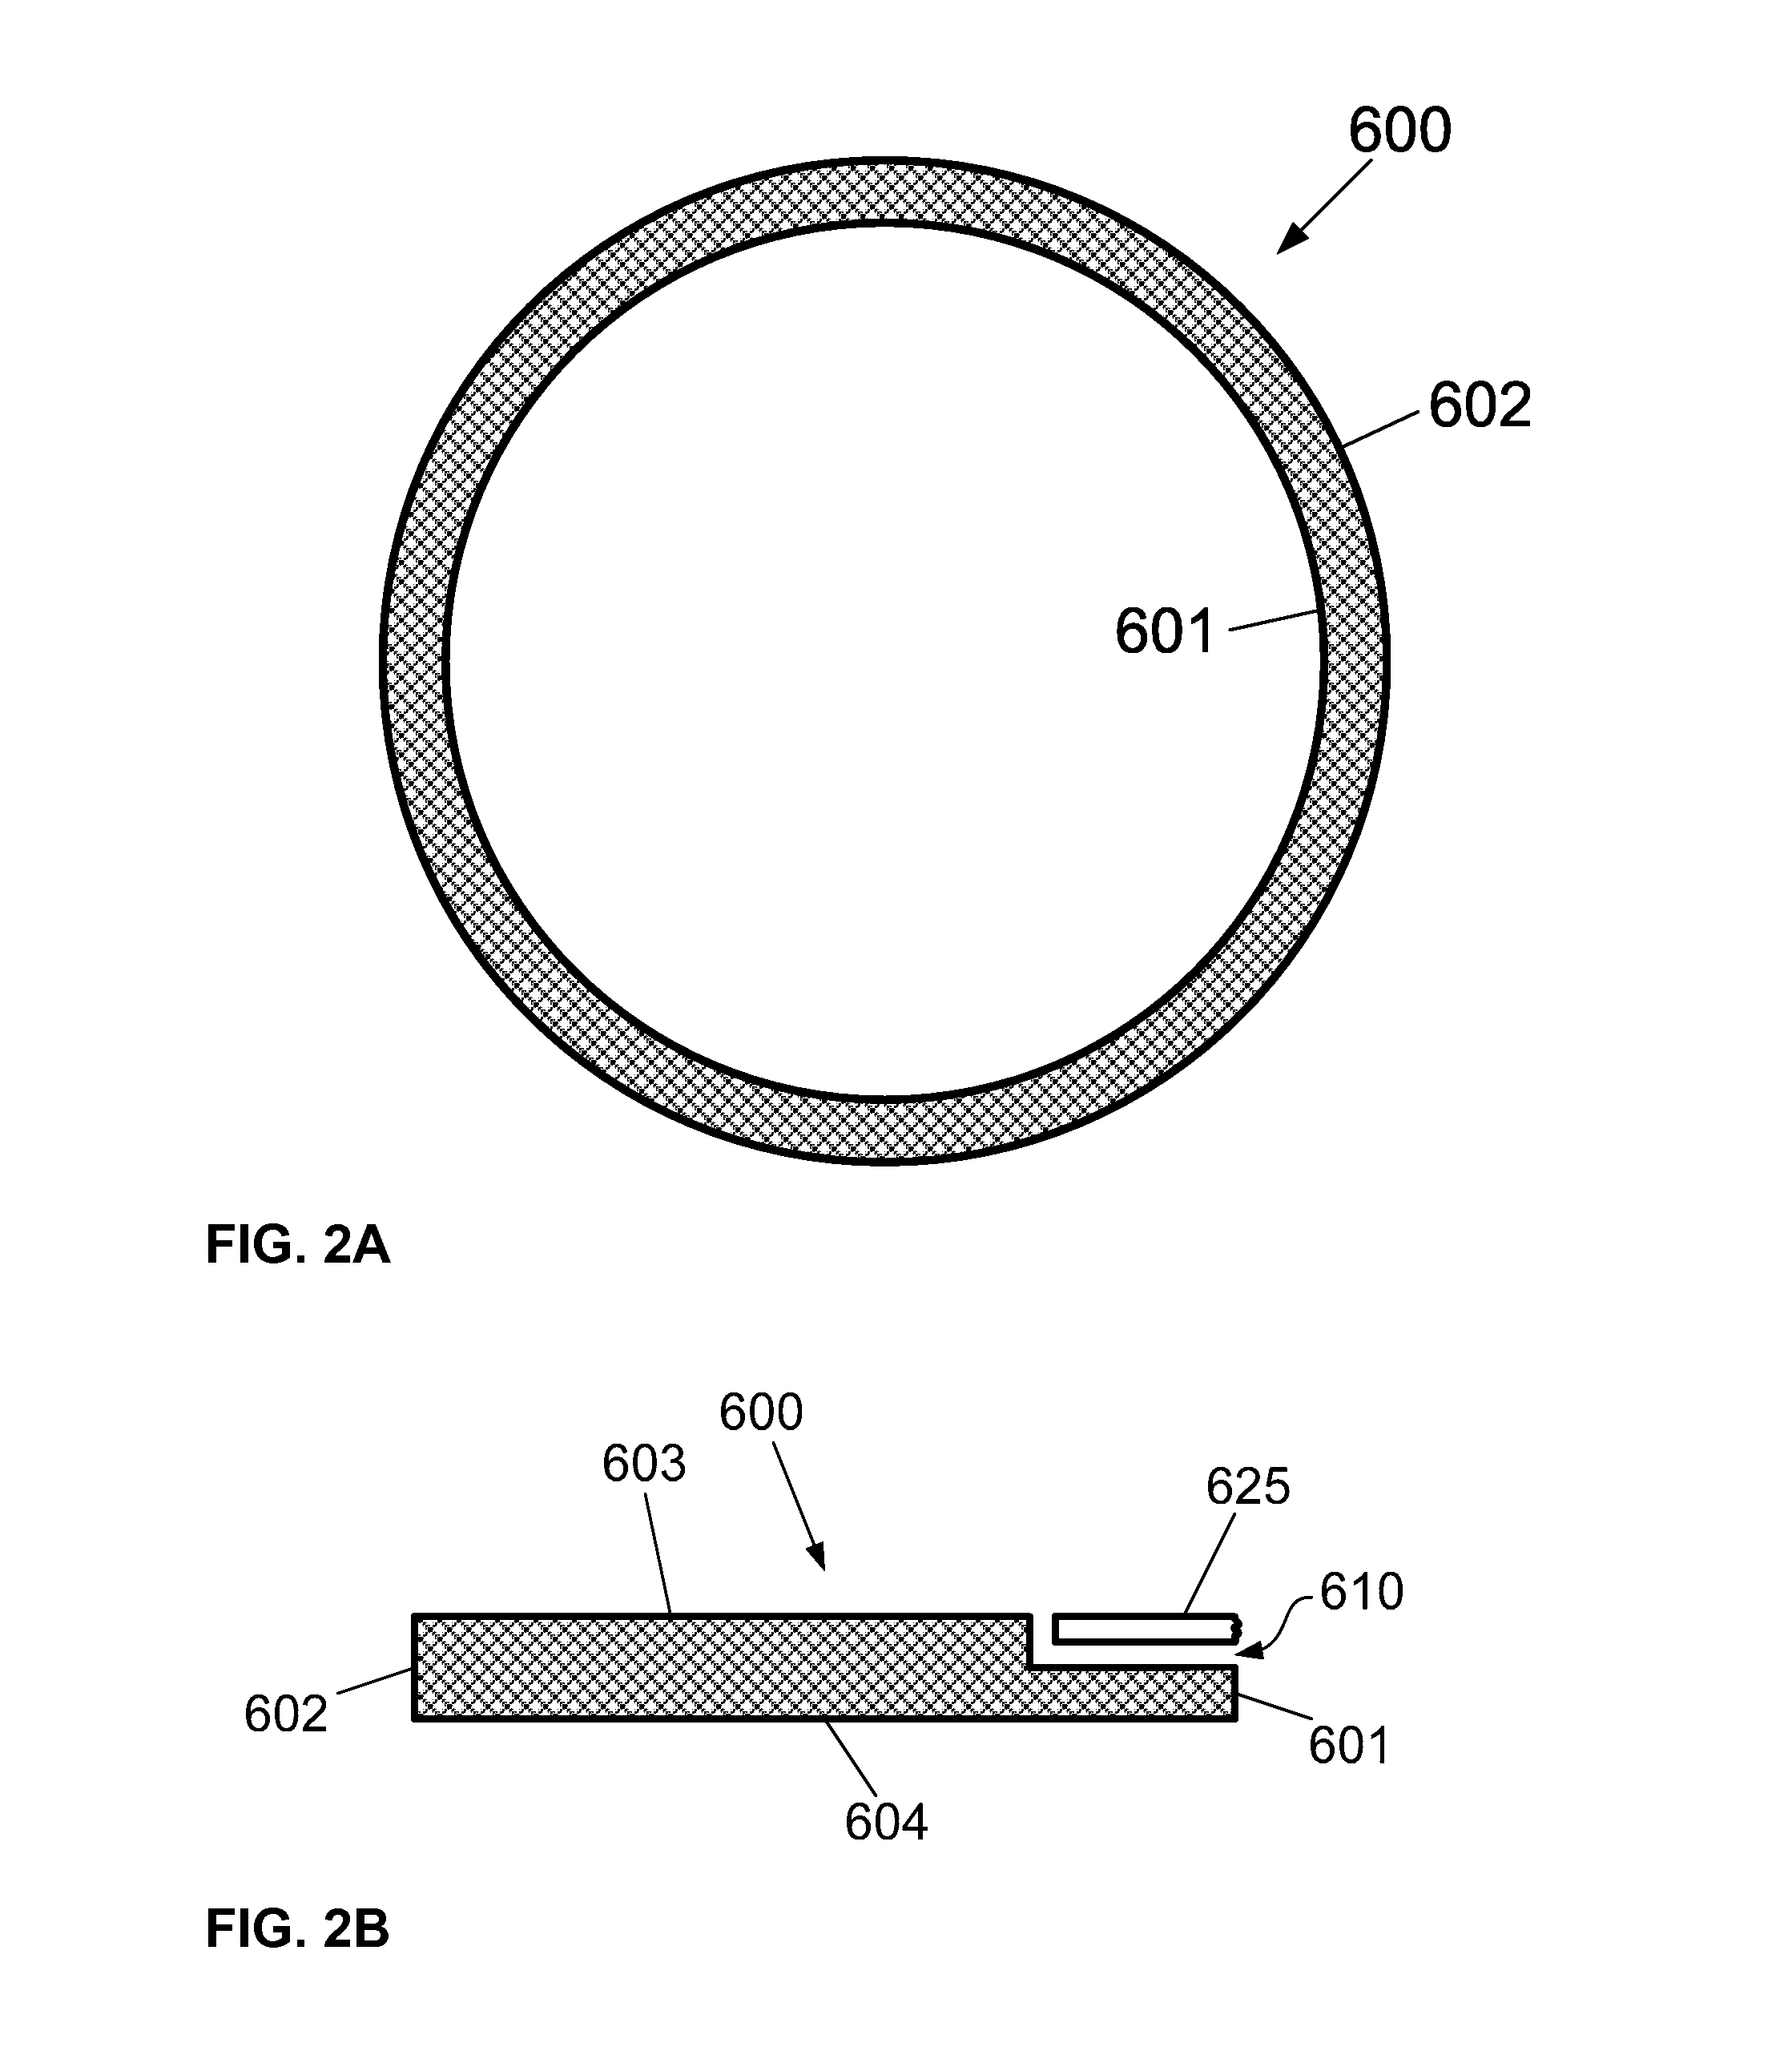 Silicon carbide focus ring for plasma etching system